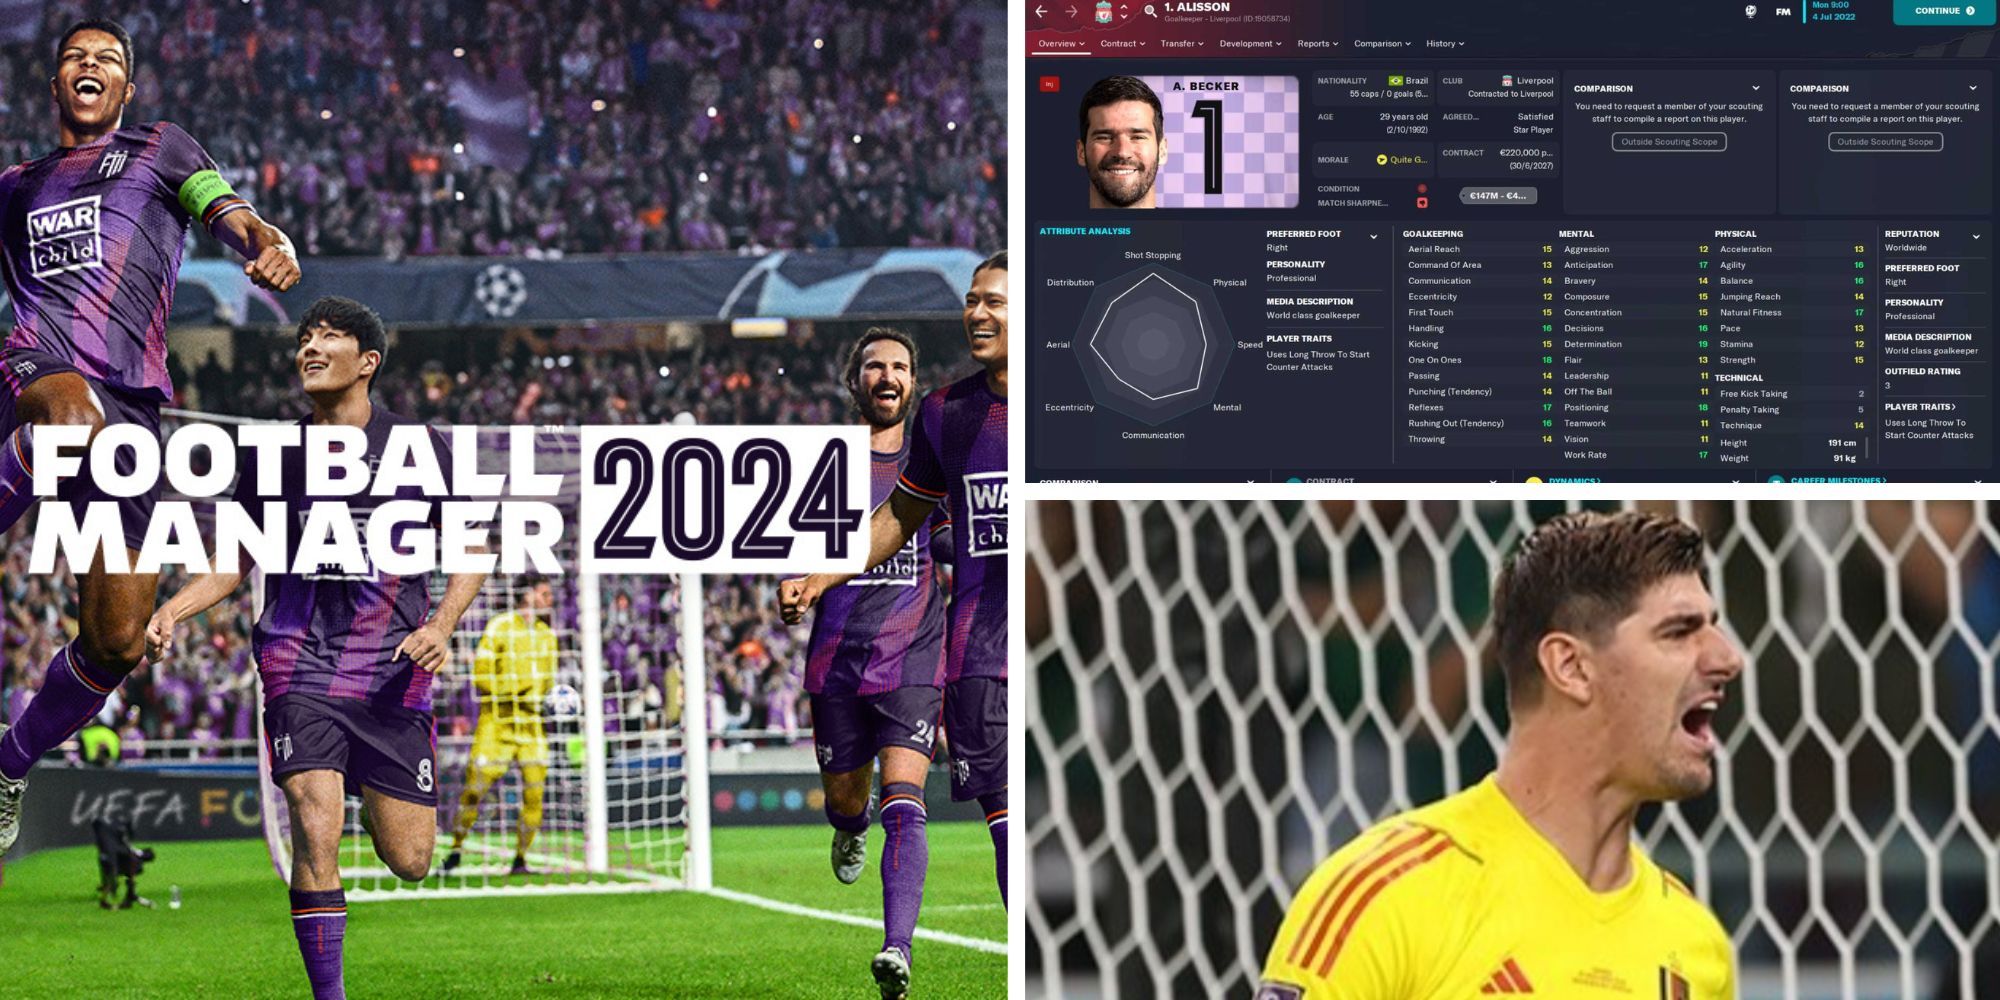 What is Football Manager 2024?